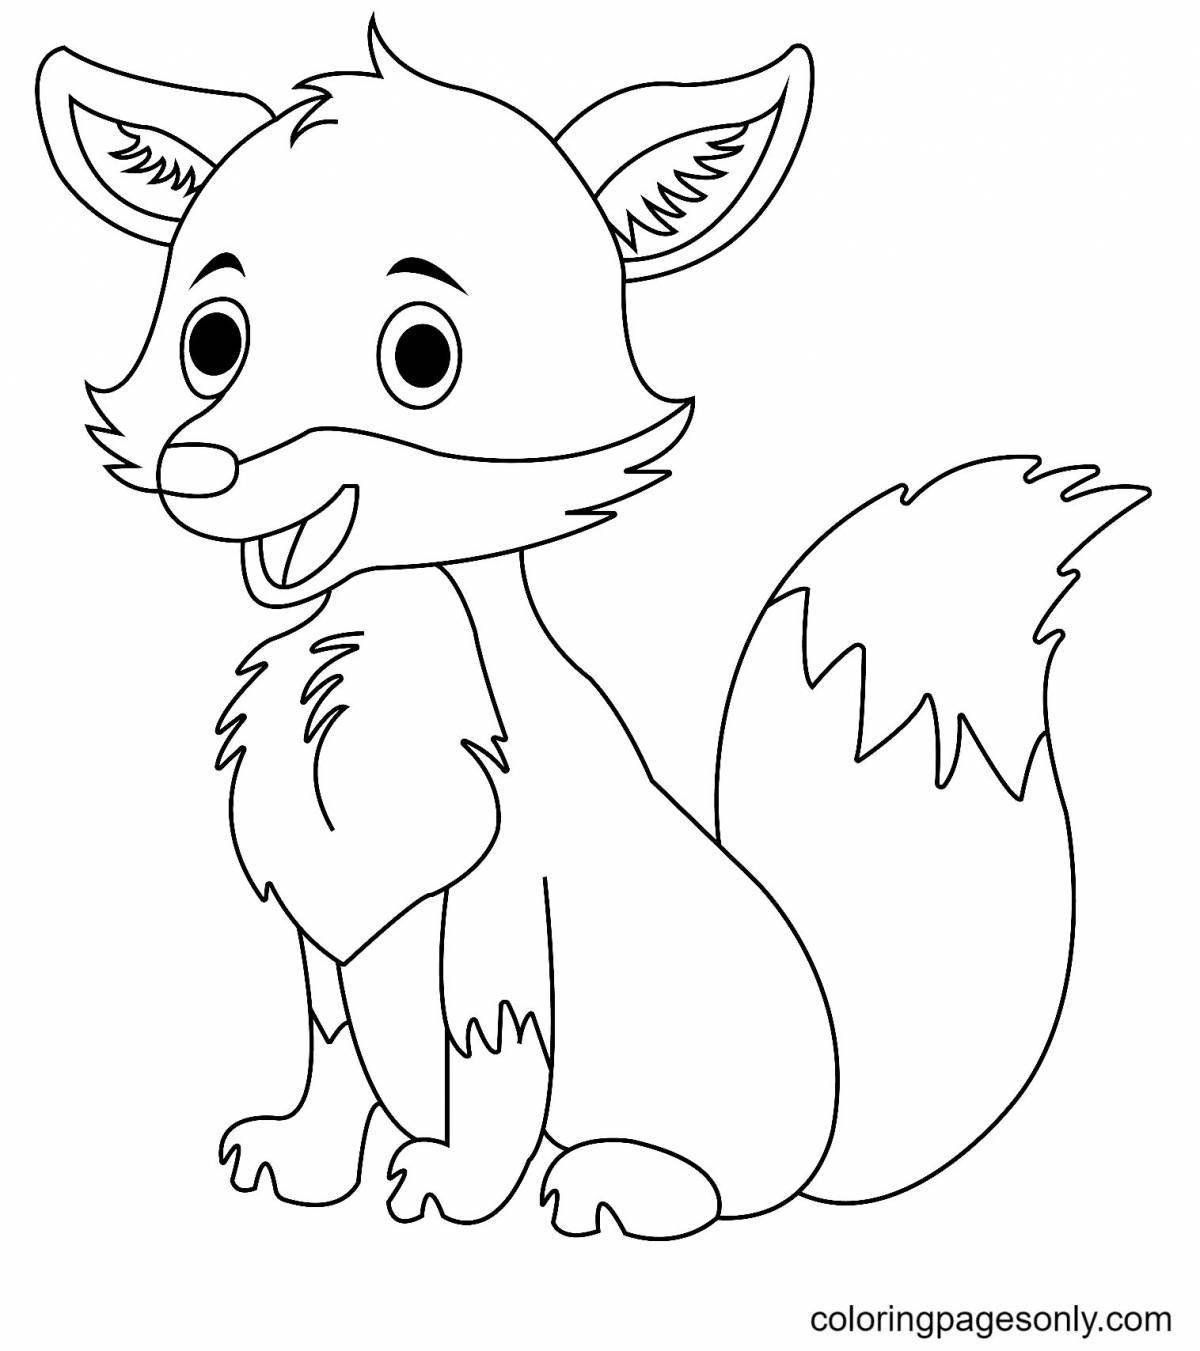 Fun coloring fox for children 3-4 years old